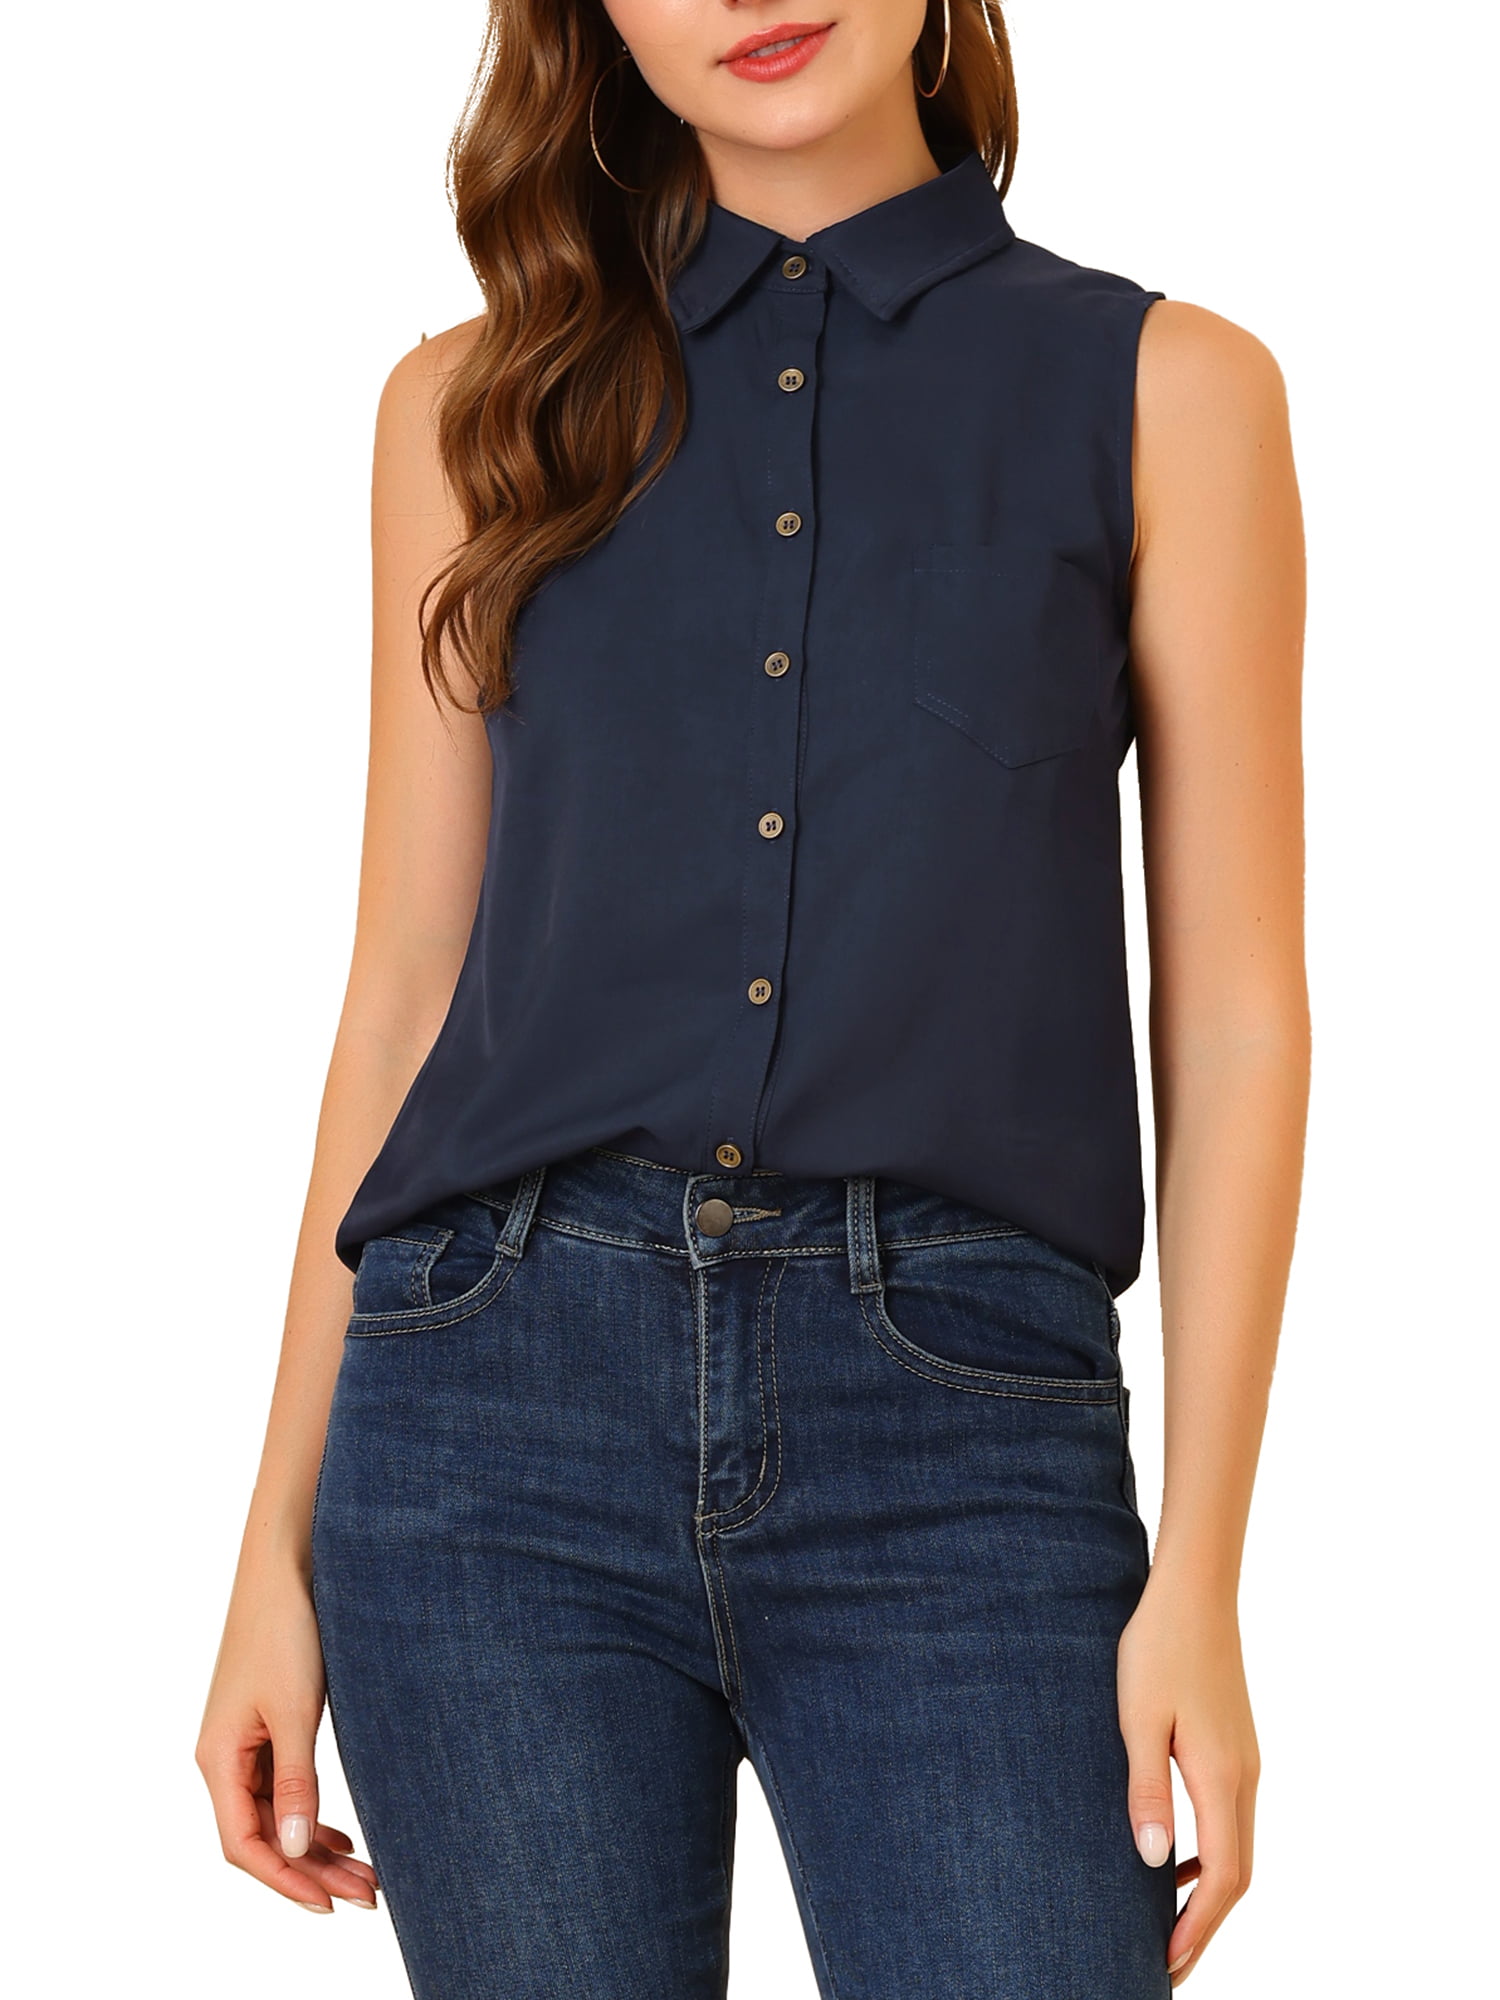 Clearance Items Outlet 90 Percent Off Dollar Deals Under 1 Sales  Today Sleeveless Button Down Tops for Women Blue at  Women's Clothing  store